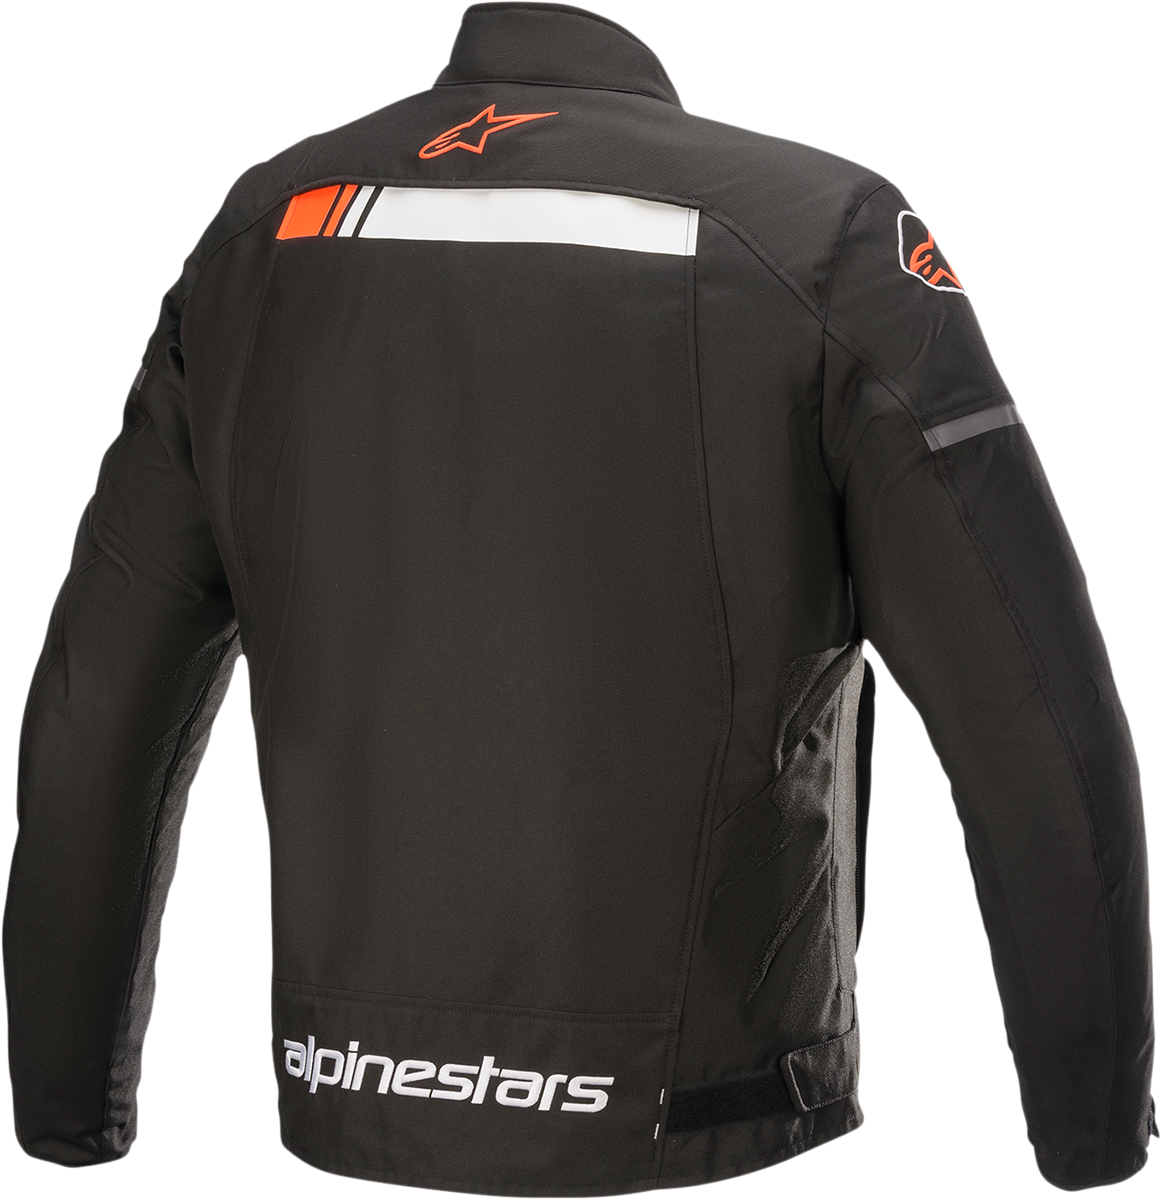 ALPINESTARS T-SPS Ignition Jacket - Black/White/Red - Small 3200322-1231-S